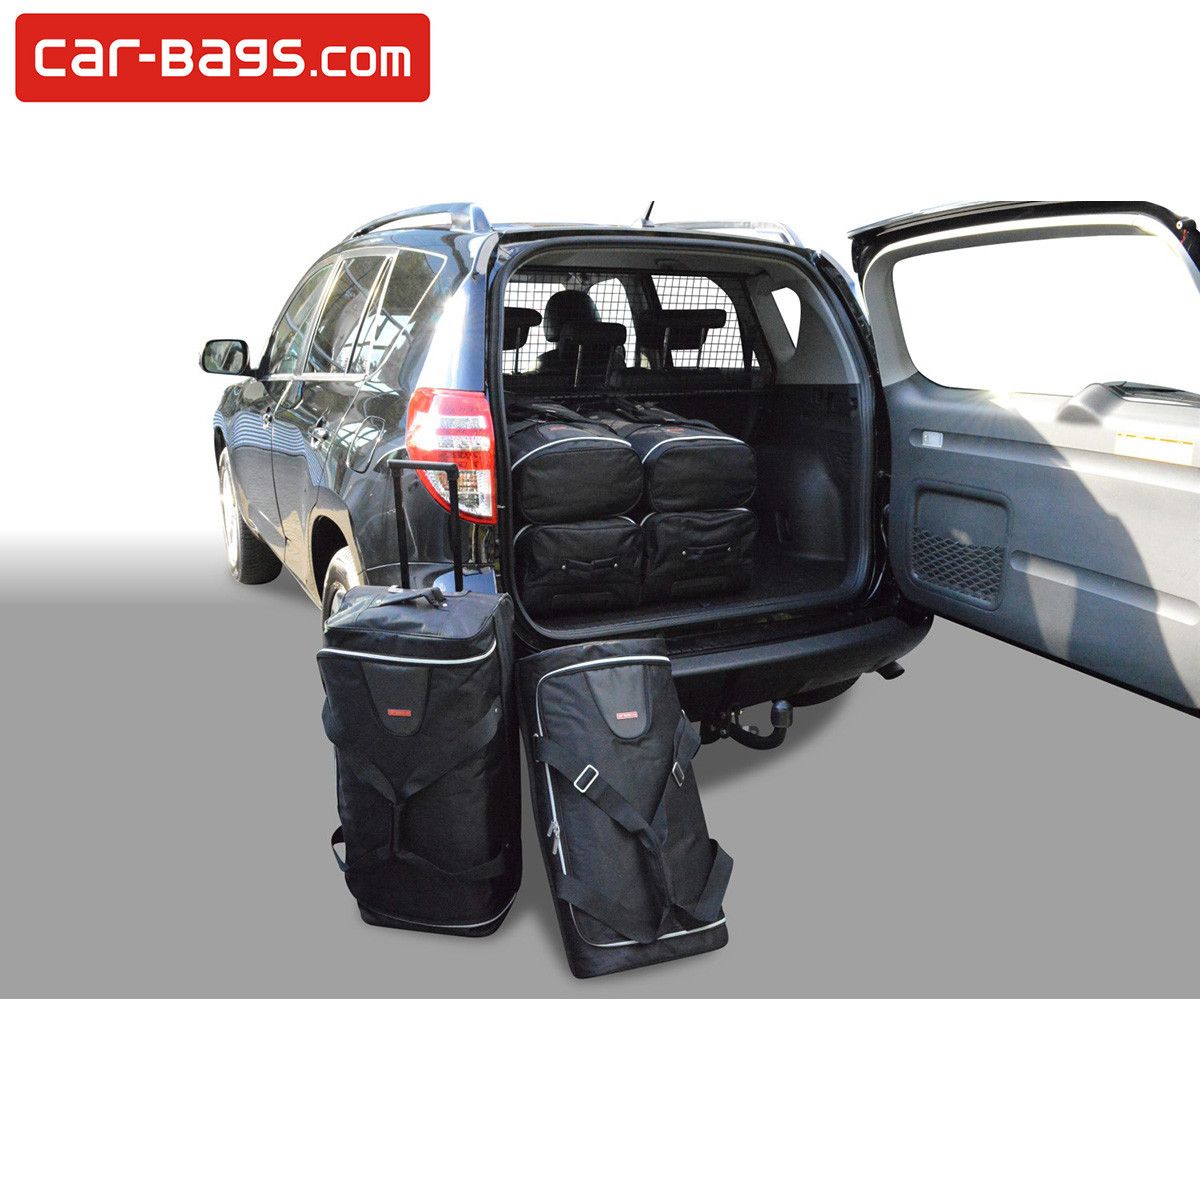 RAV4 covers Travel Toyota | Bags for for | Car pcs) fit Shop Time bags Covers (XA30) (6 Perfect space saving | and 379 made $ tailor car III fits